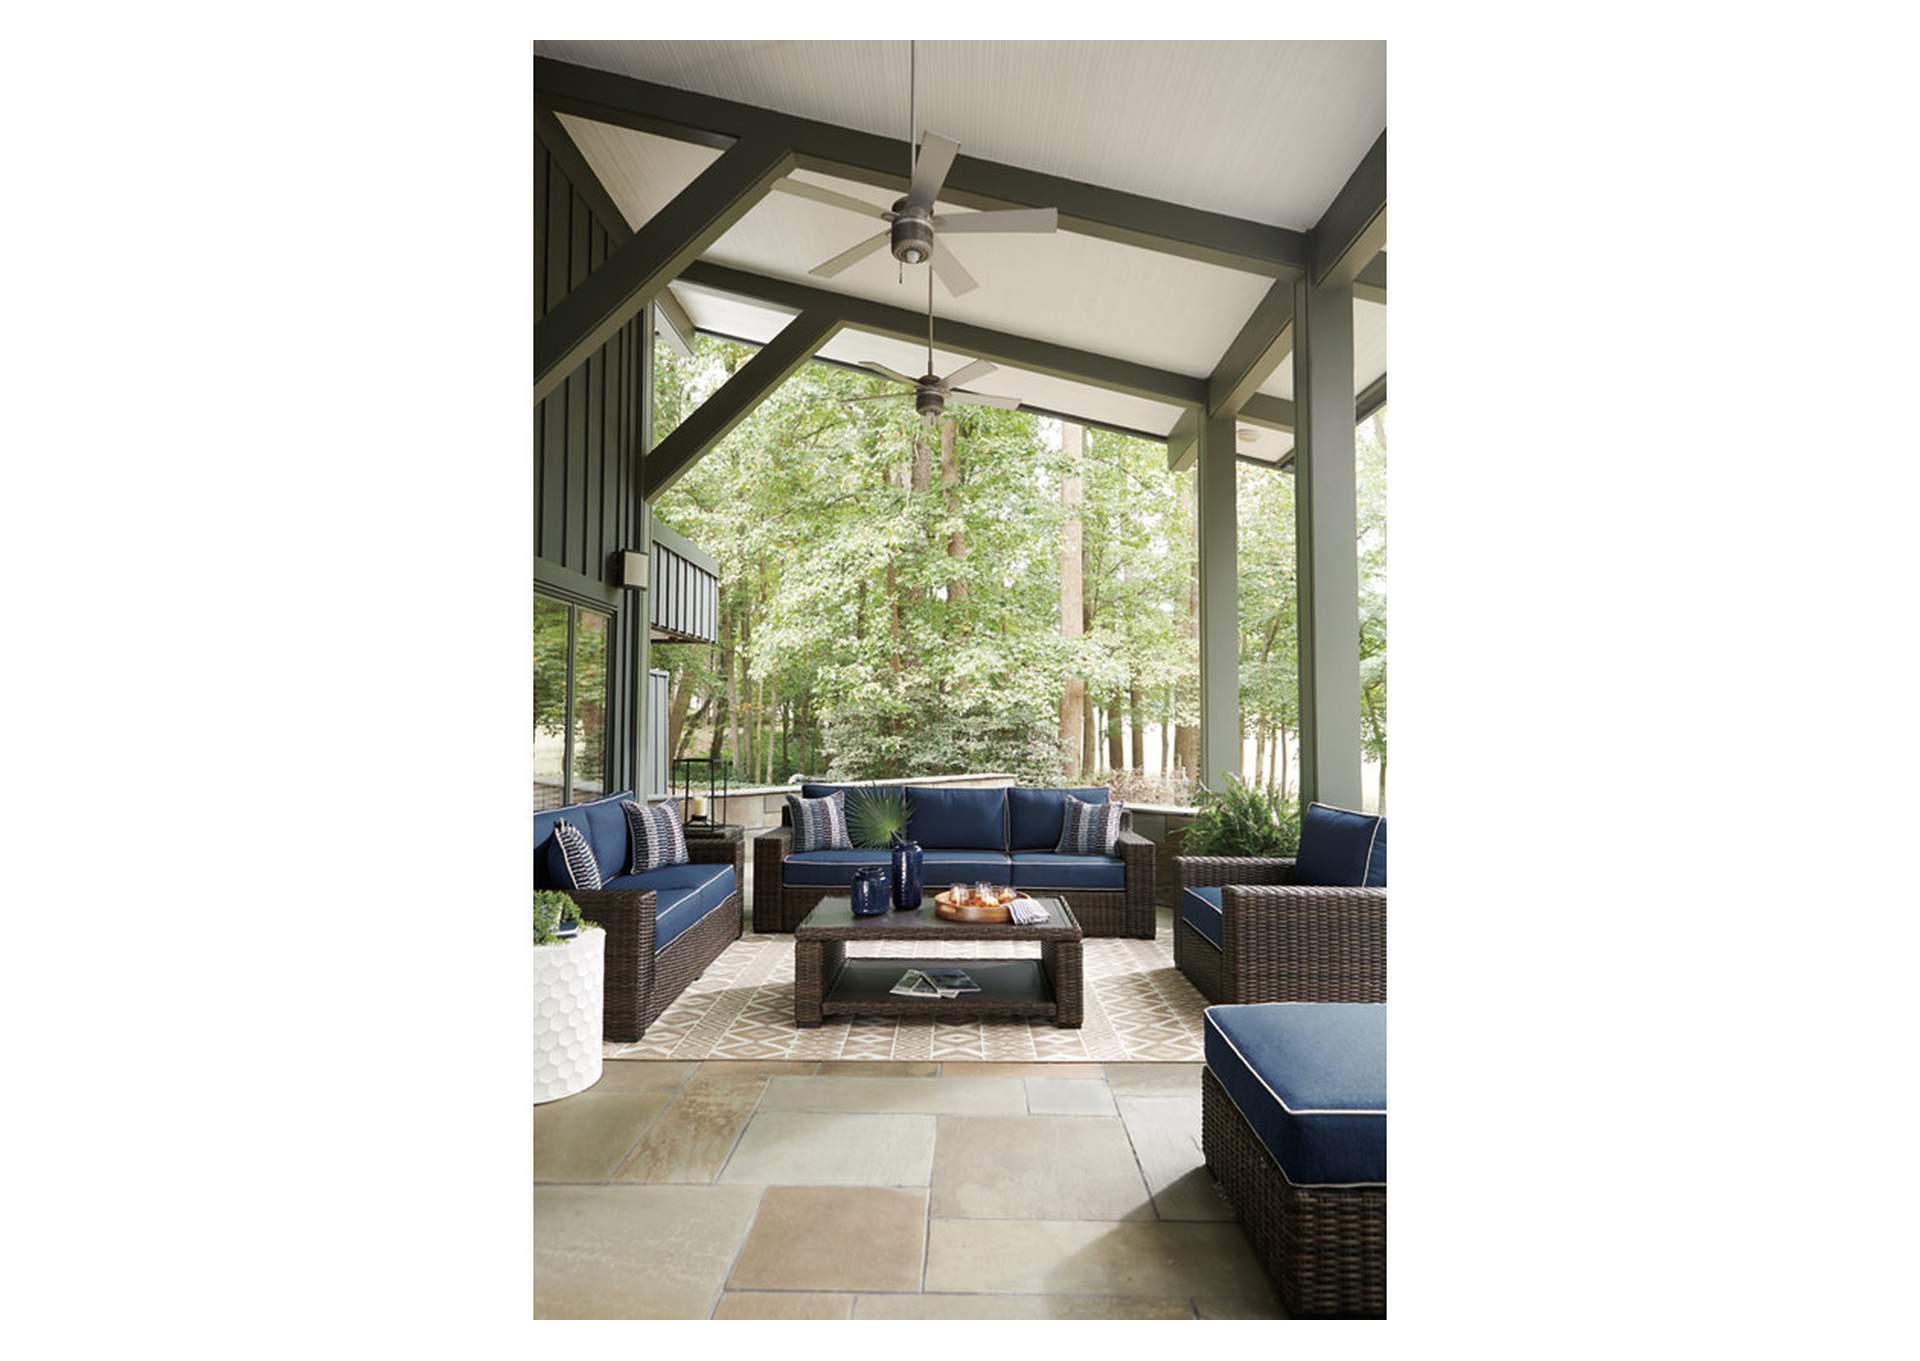 Grasson Lane Outdoor Sofa, Loveseat, Lounge Chair and Ottoman with Coffee Table and End Table,Outdoor By Ashley